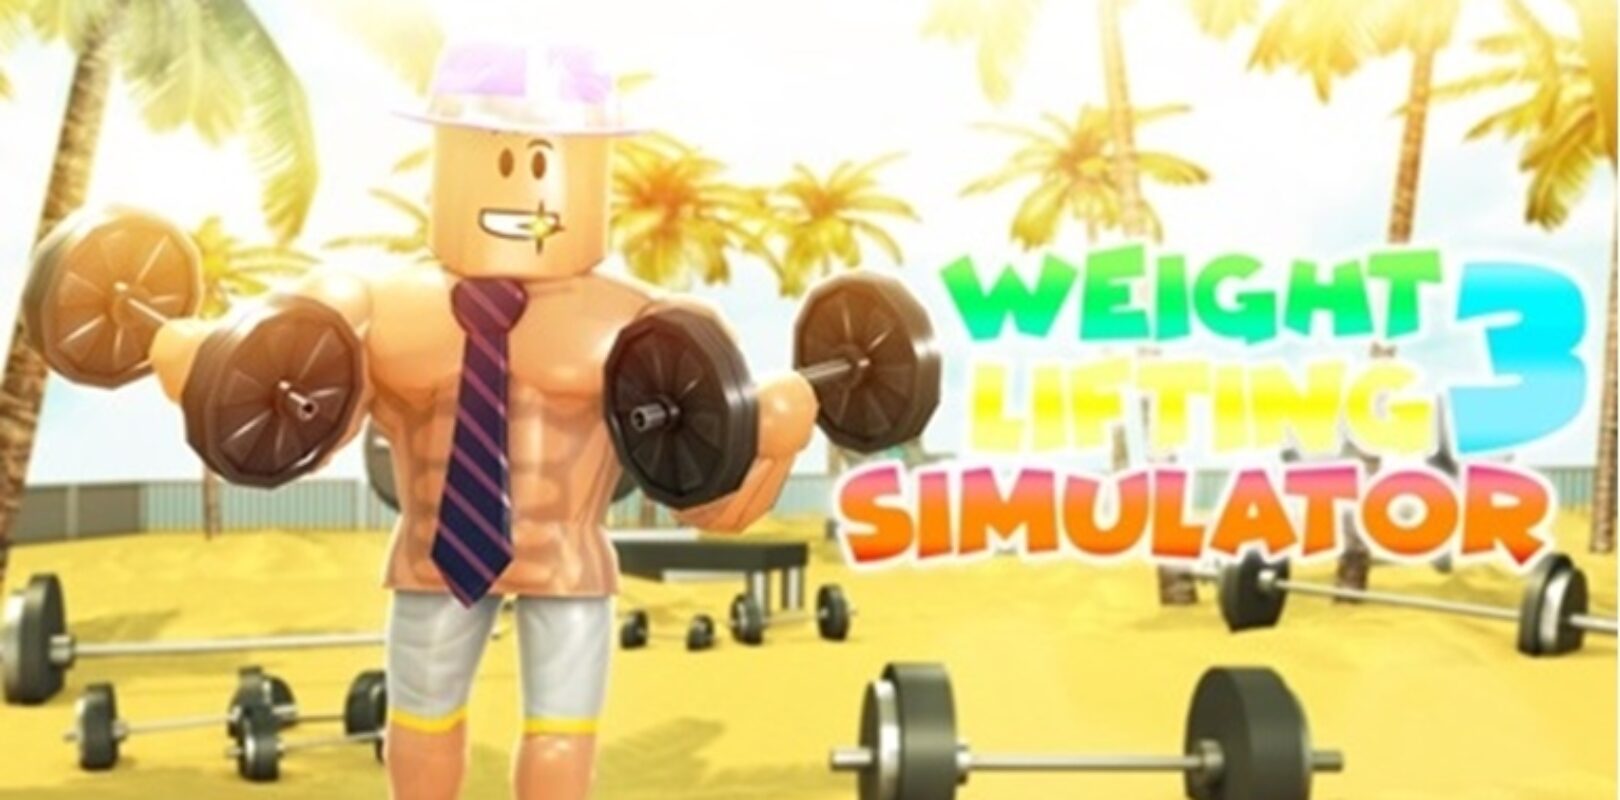 Weight Lifting Simulator 3 Codes 2020 Pivotal Gamers - hacks for roblox weight lifting simulator 2